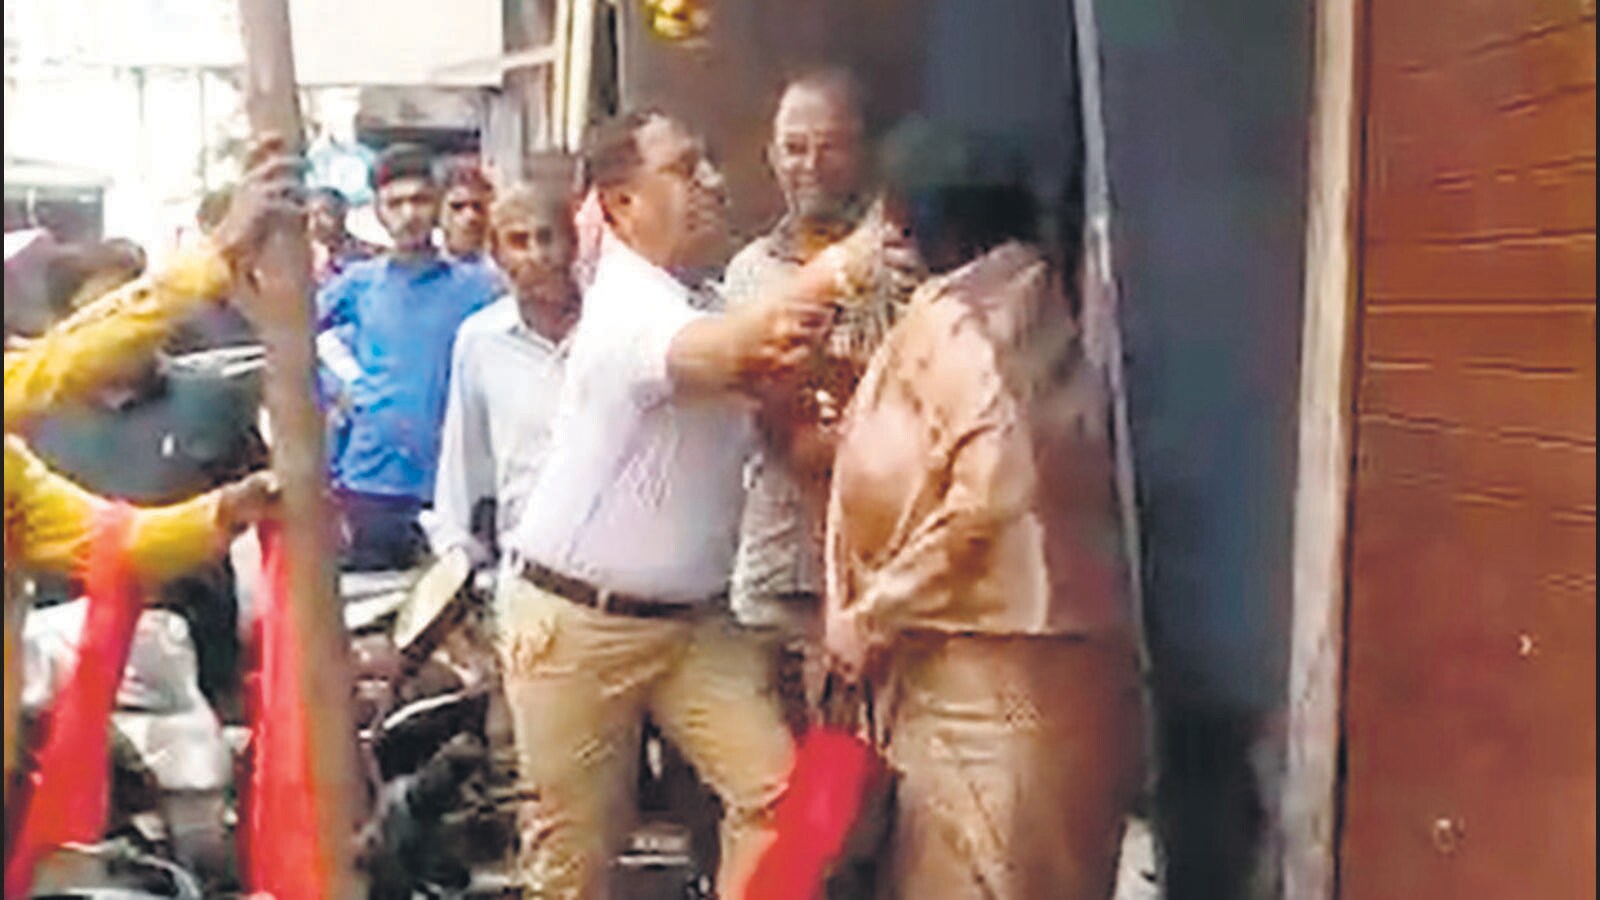 MNS functionary caught on camera slapping elderly woman, arrested Hindustan...